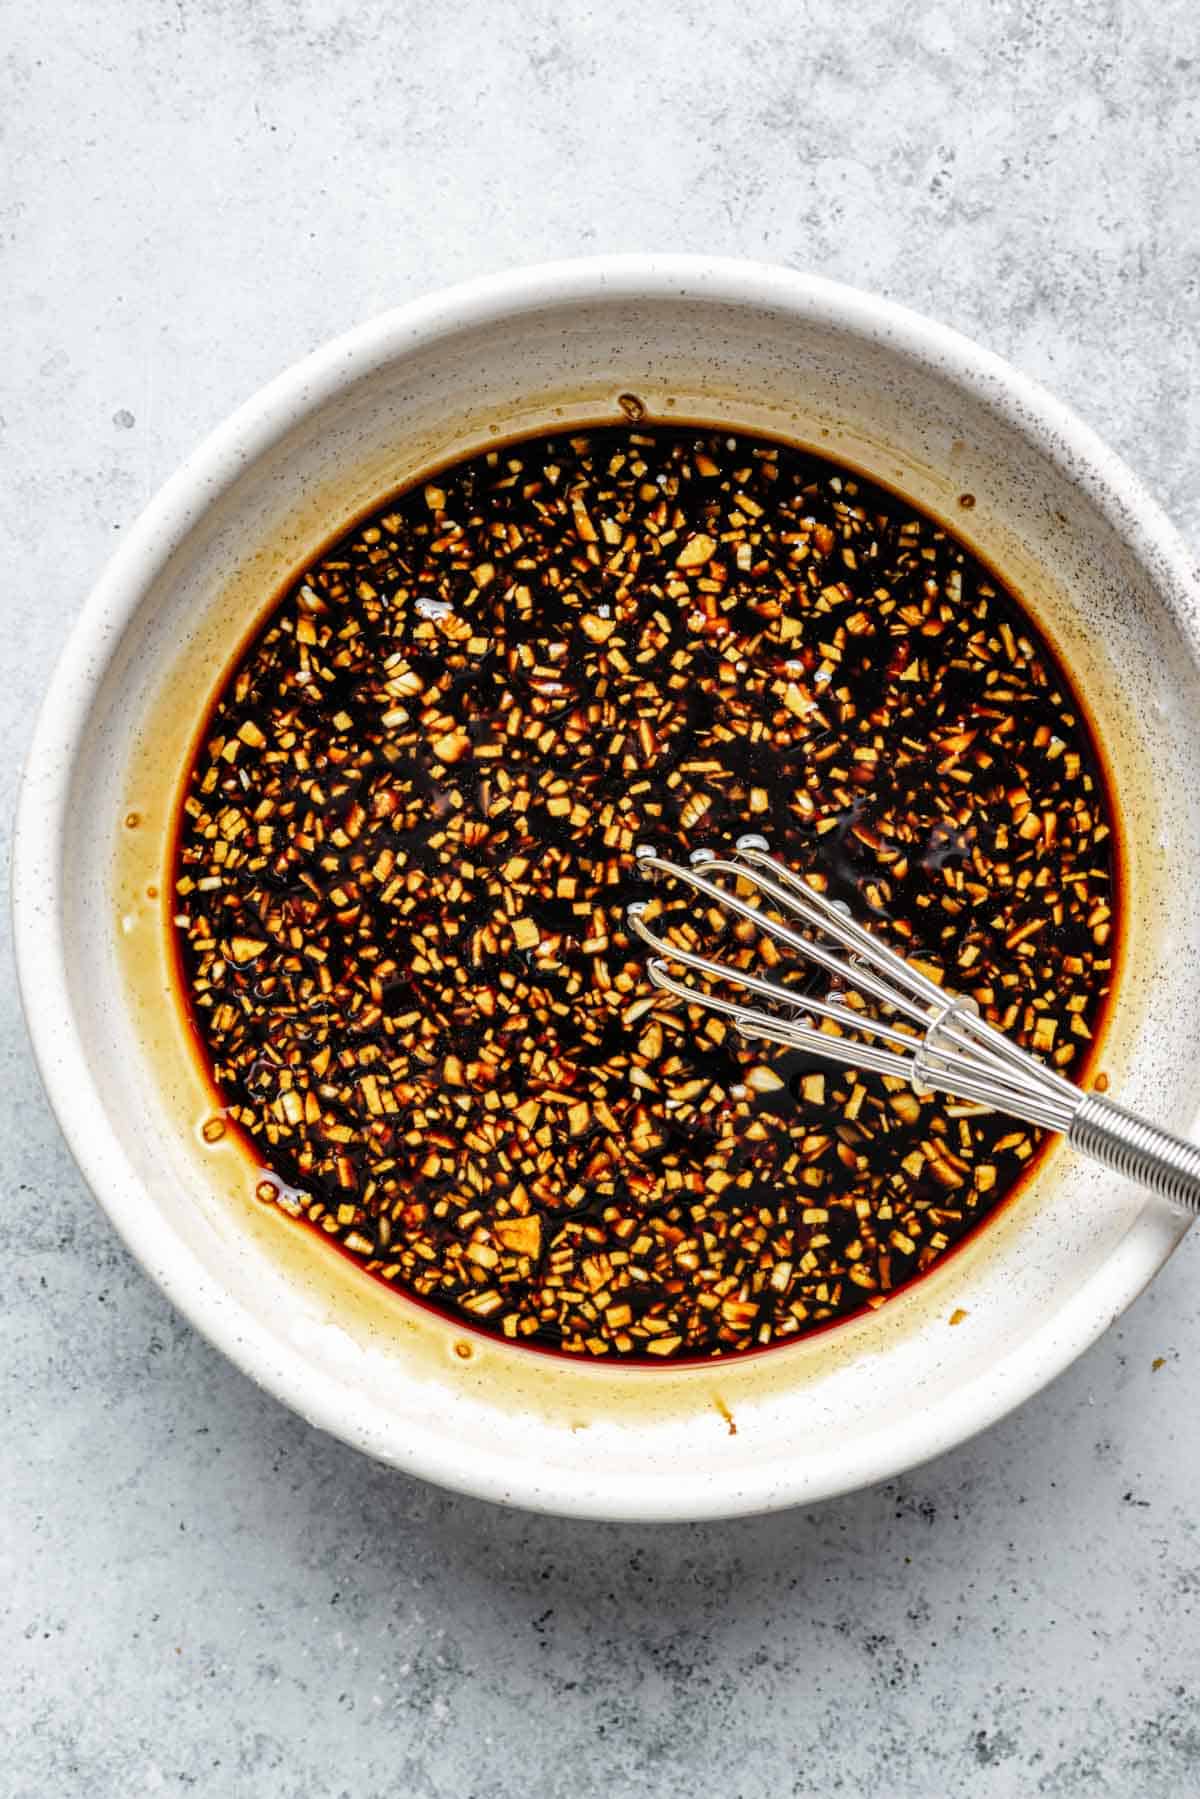 soy sauce-based sauce with minced garlic and ginger in a bowl with a metal whisk